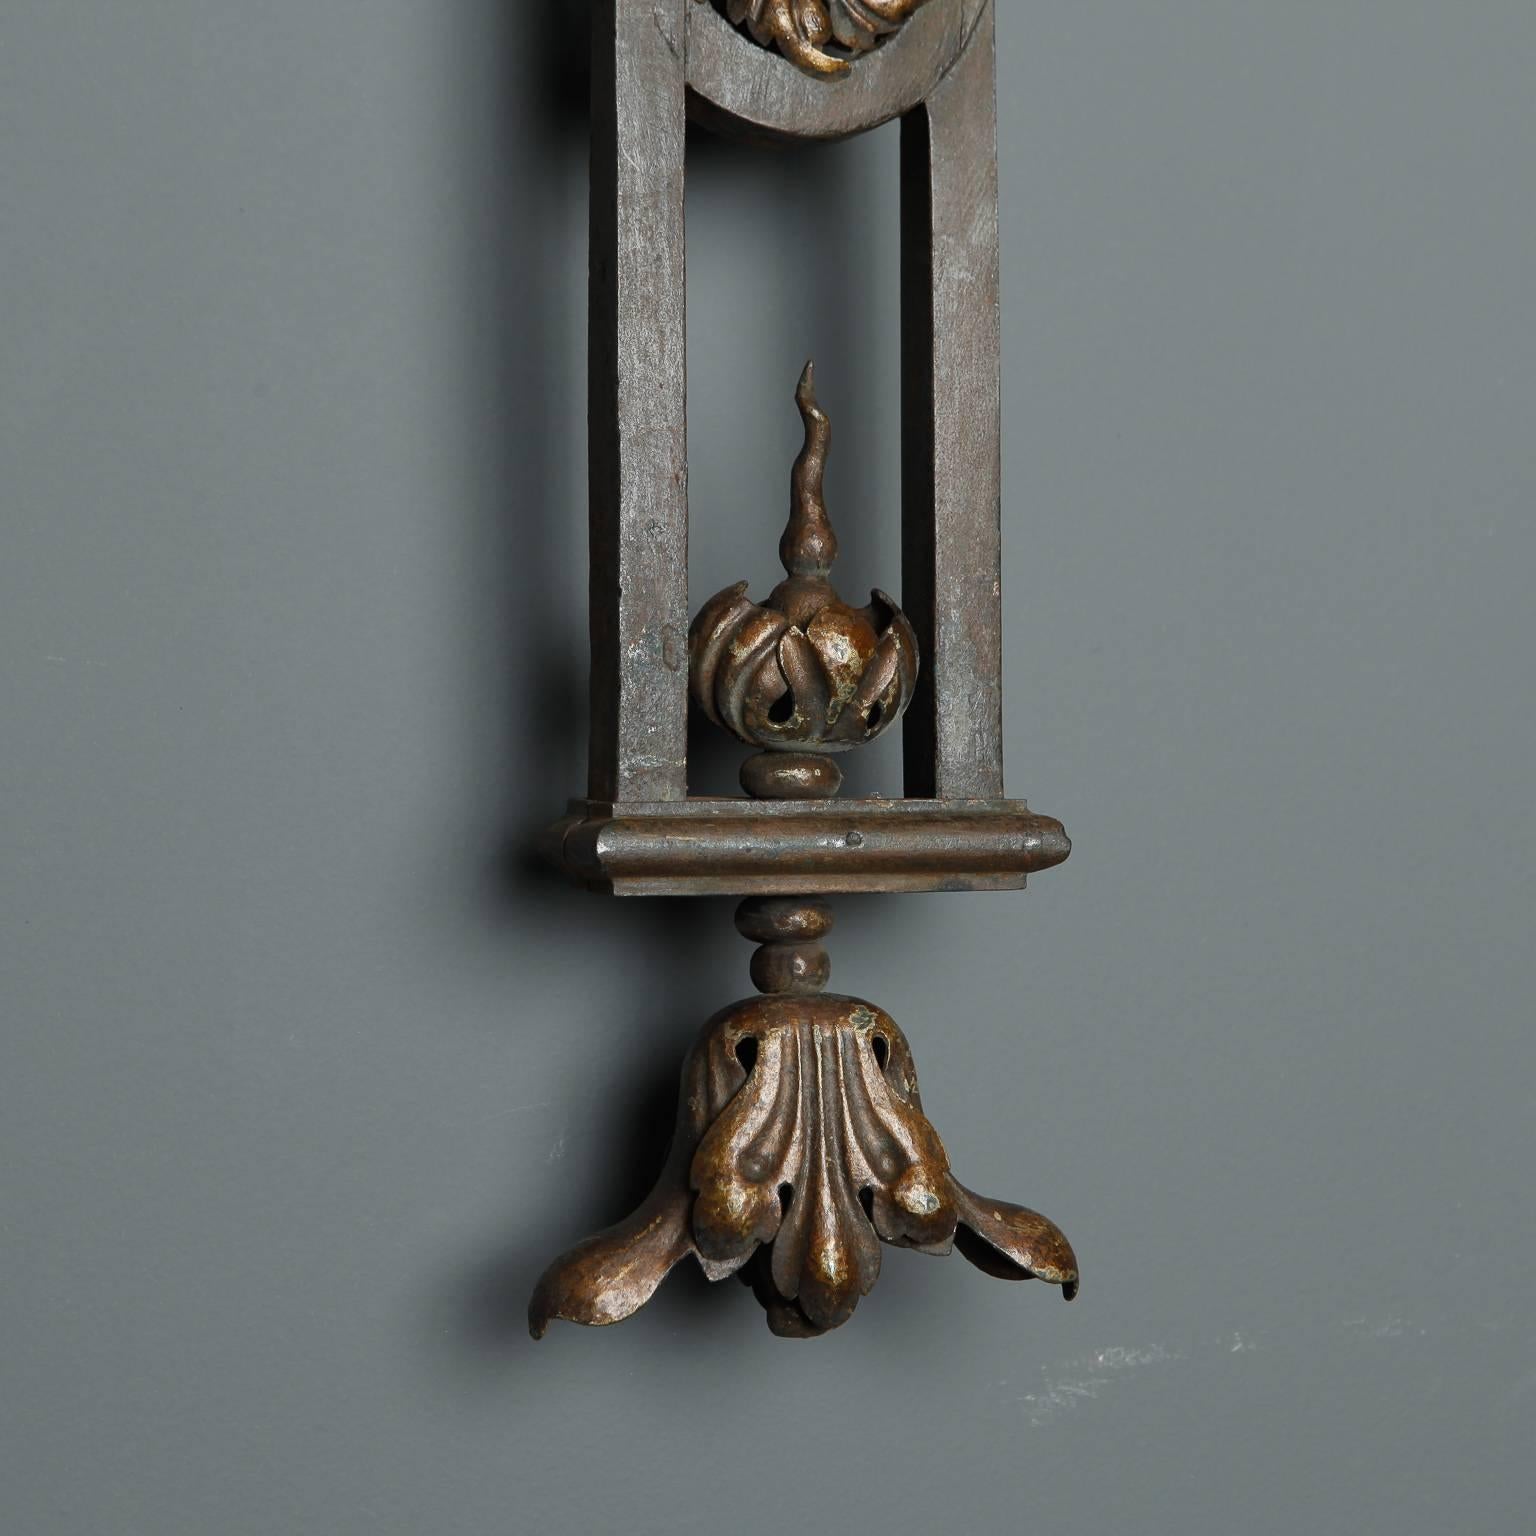 19th Century Pair of Tall Iron Sconces Made from Antique Balustrades